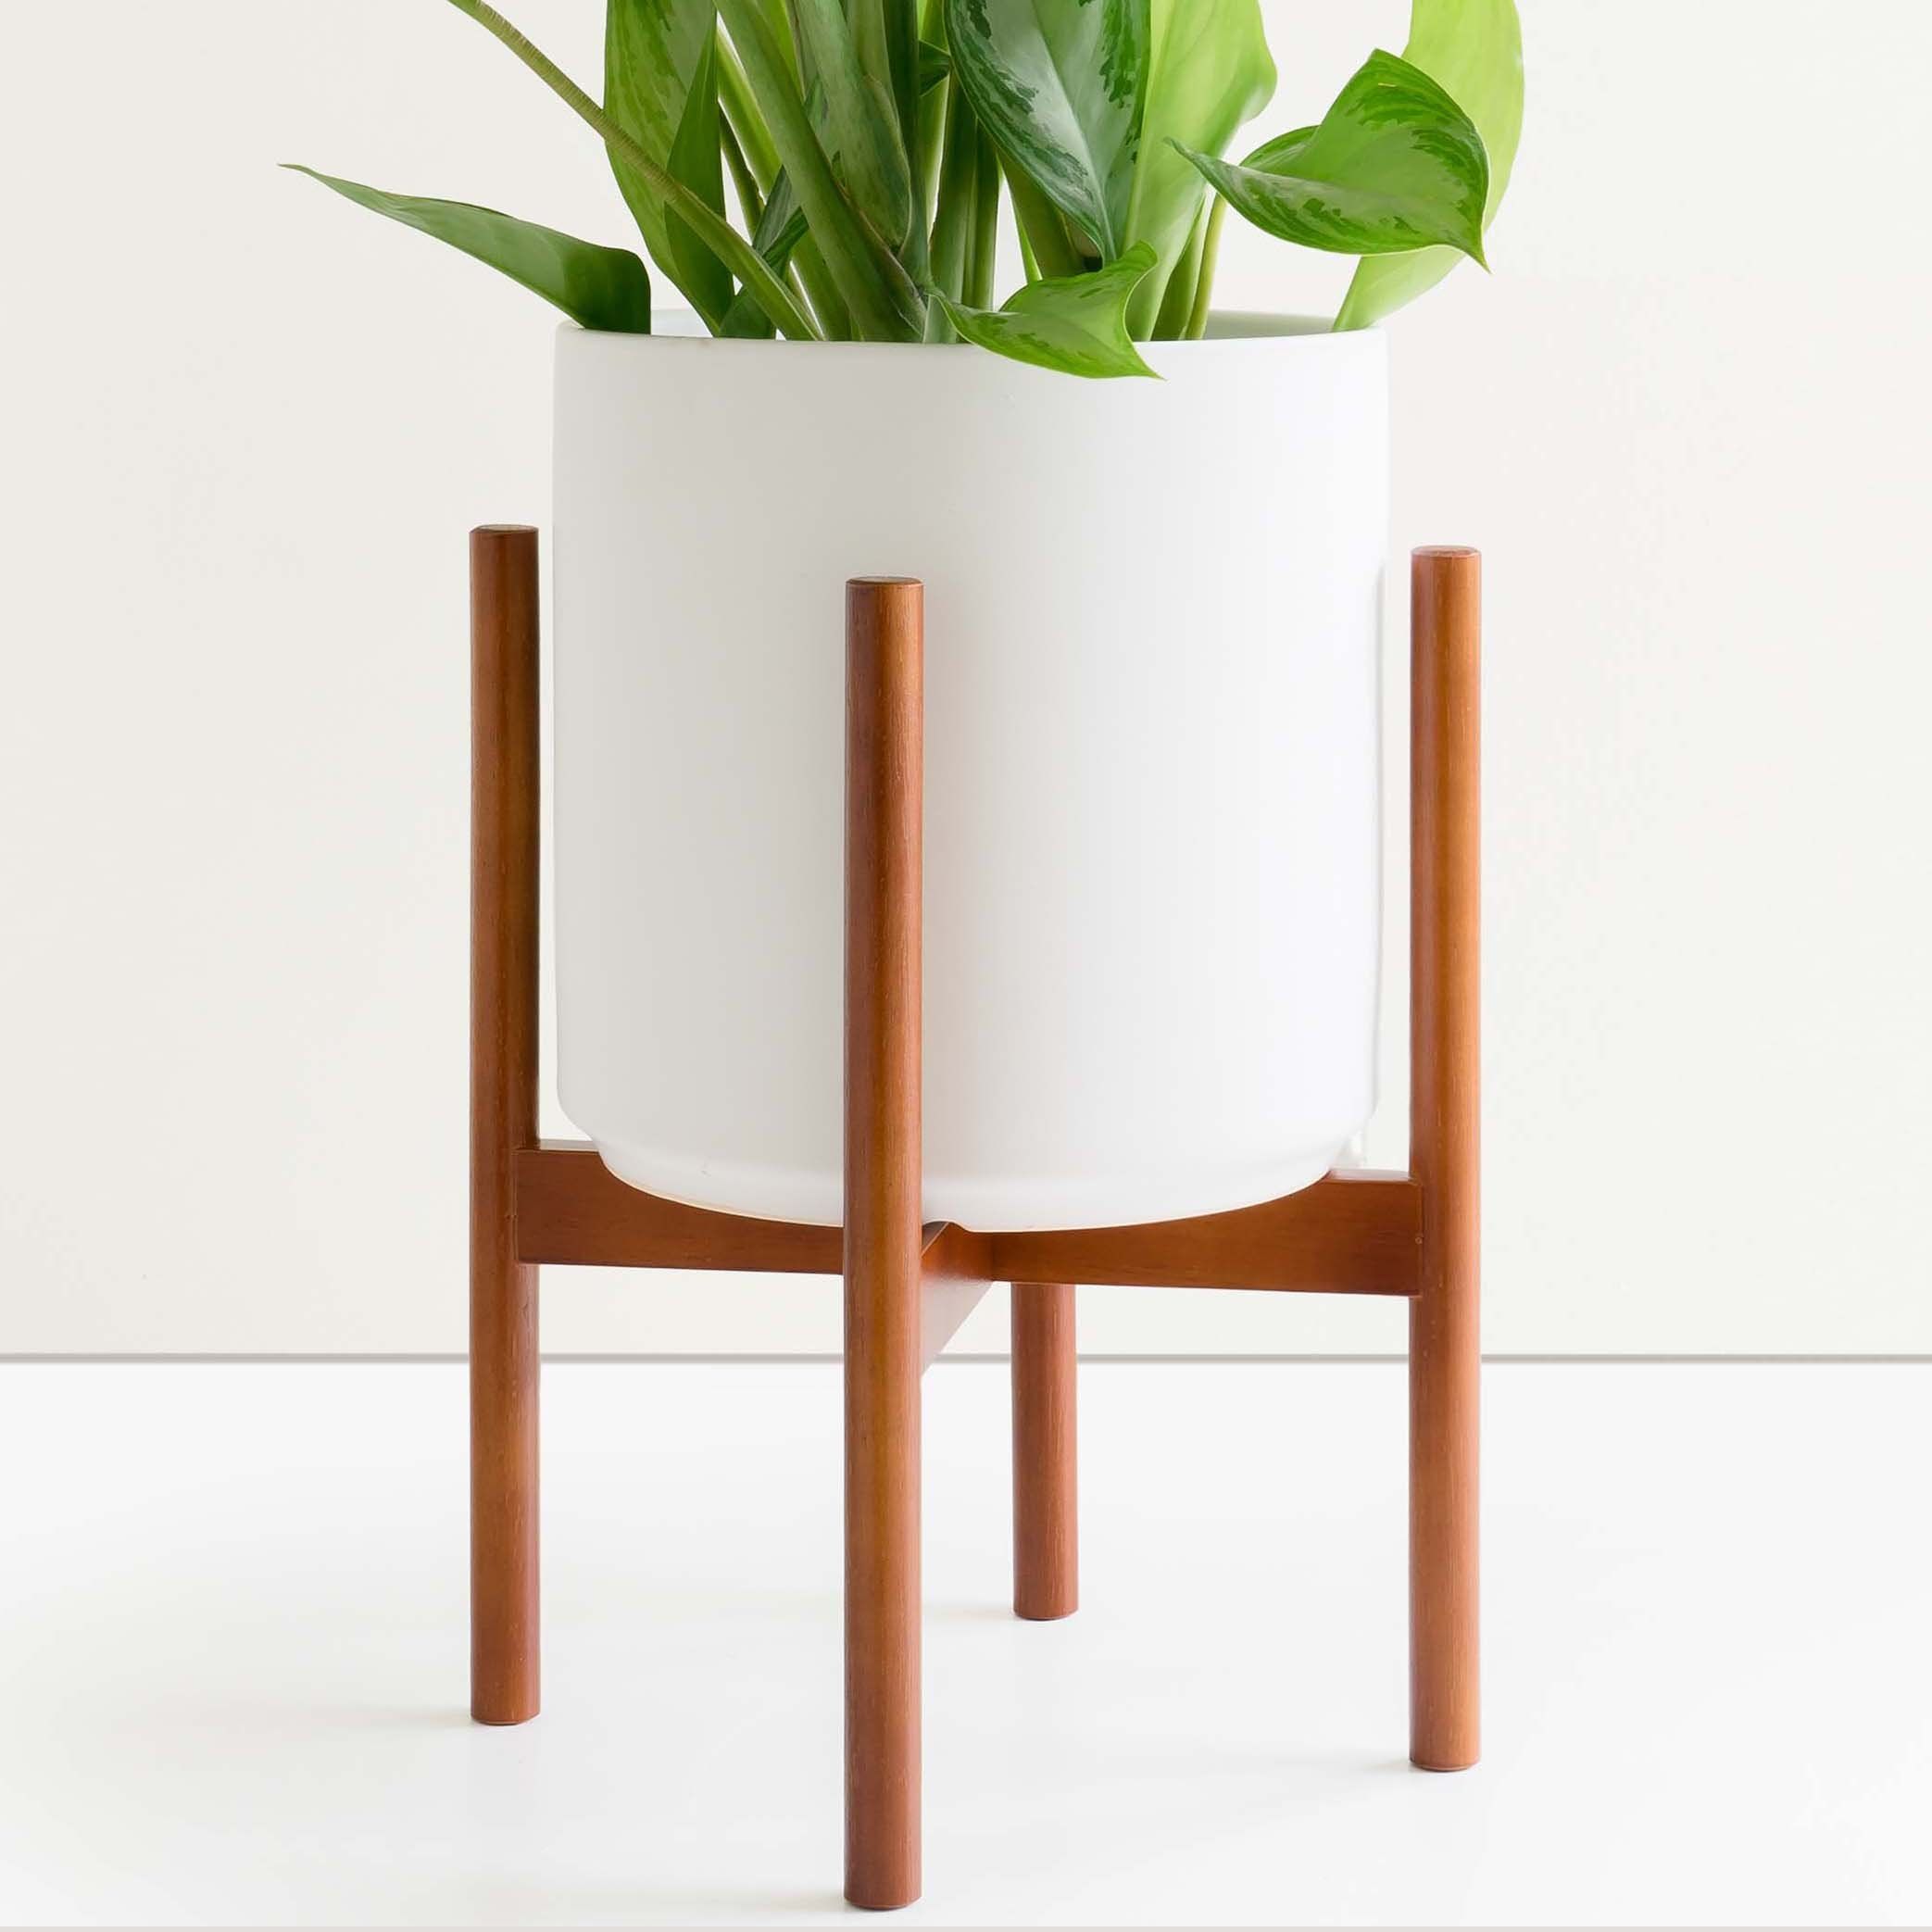 Featured Photo of 15 Ideas of 12-inch Plant Stands